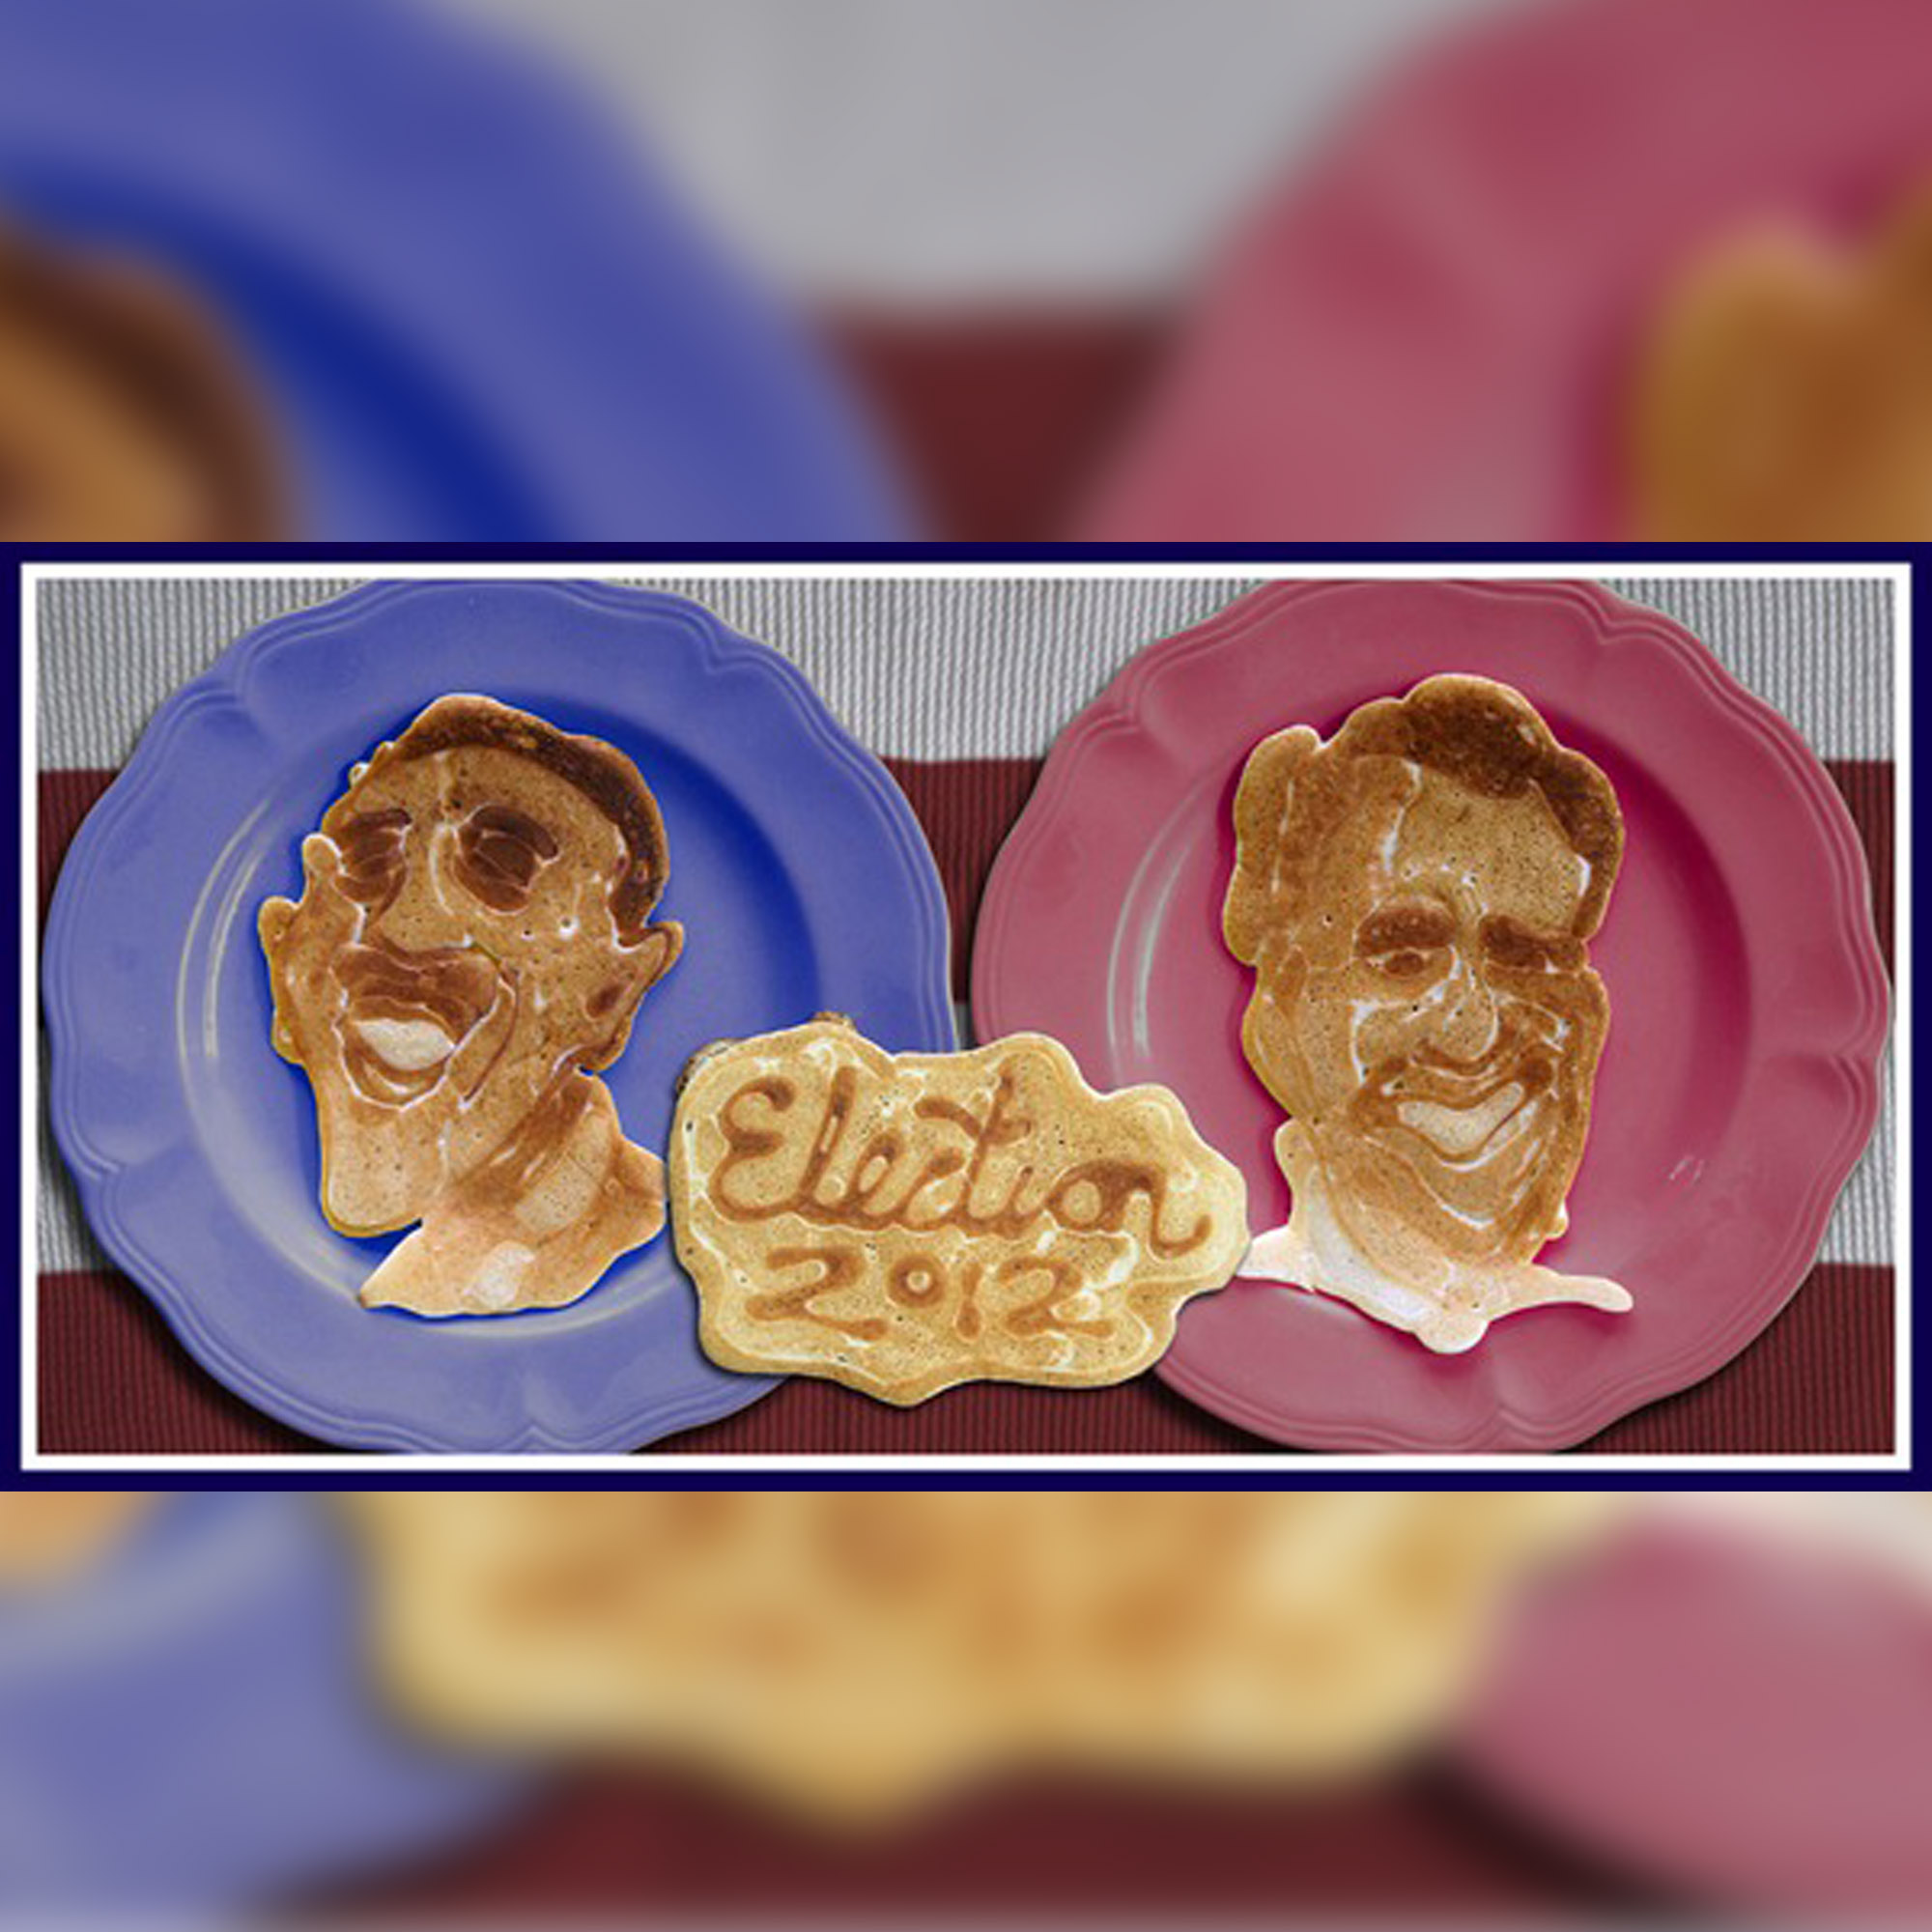 PHOTO: Barack Obama and Mitt Romney appear in pancake art made by Nathan Shields to illustrate the 2012 election for his children. 